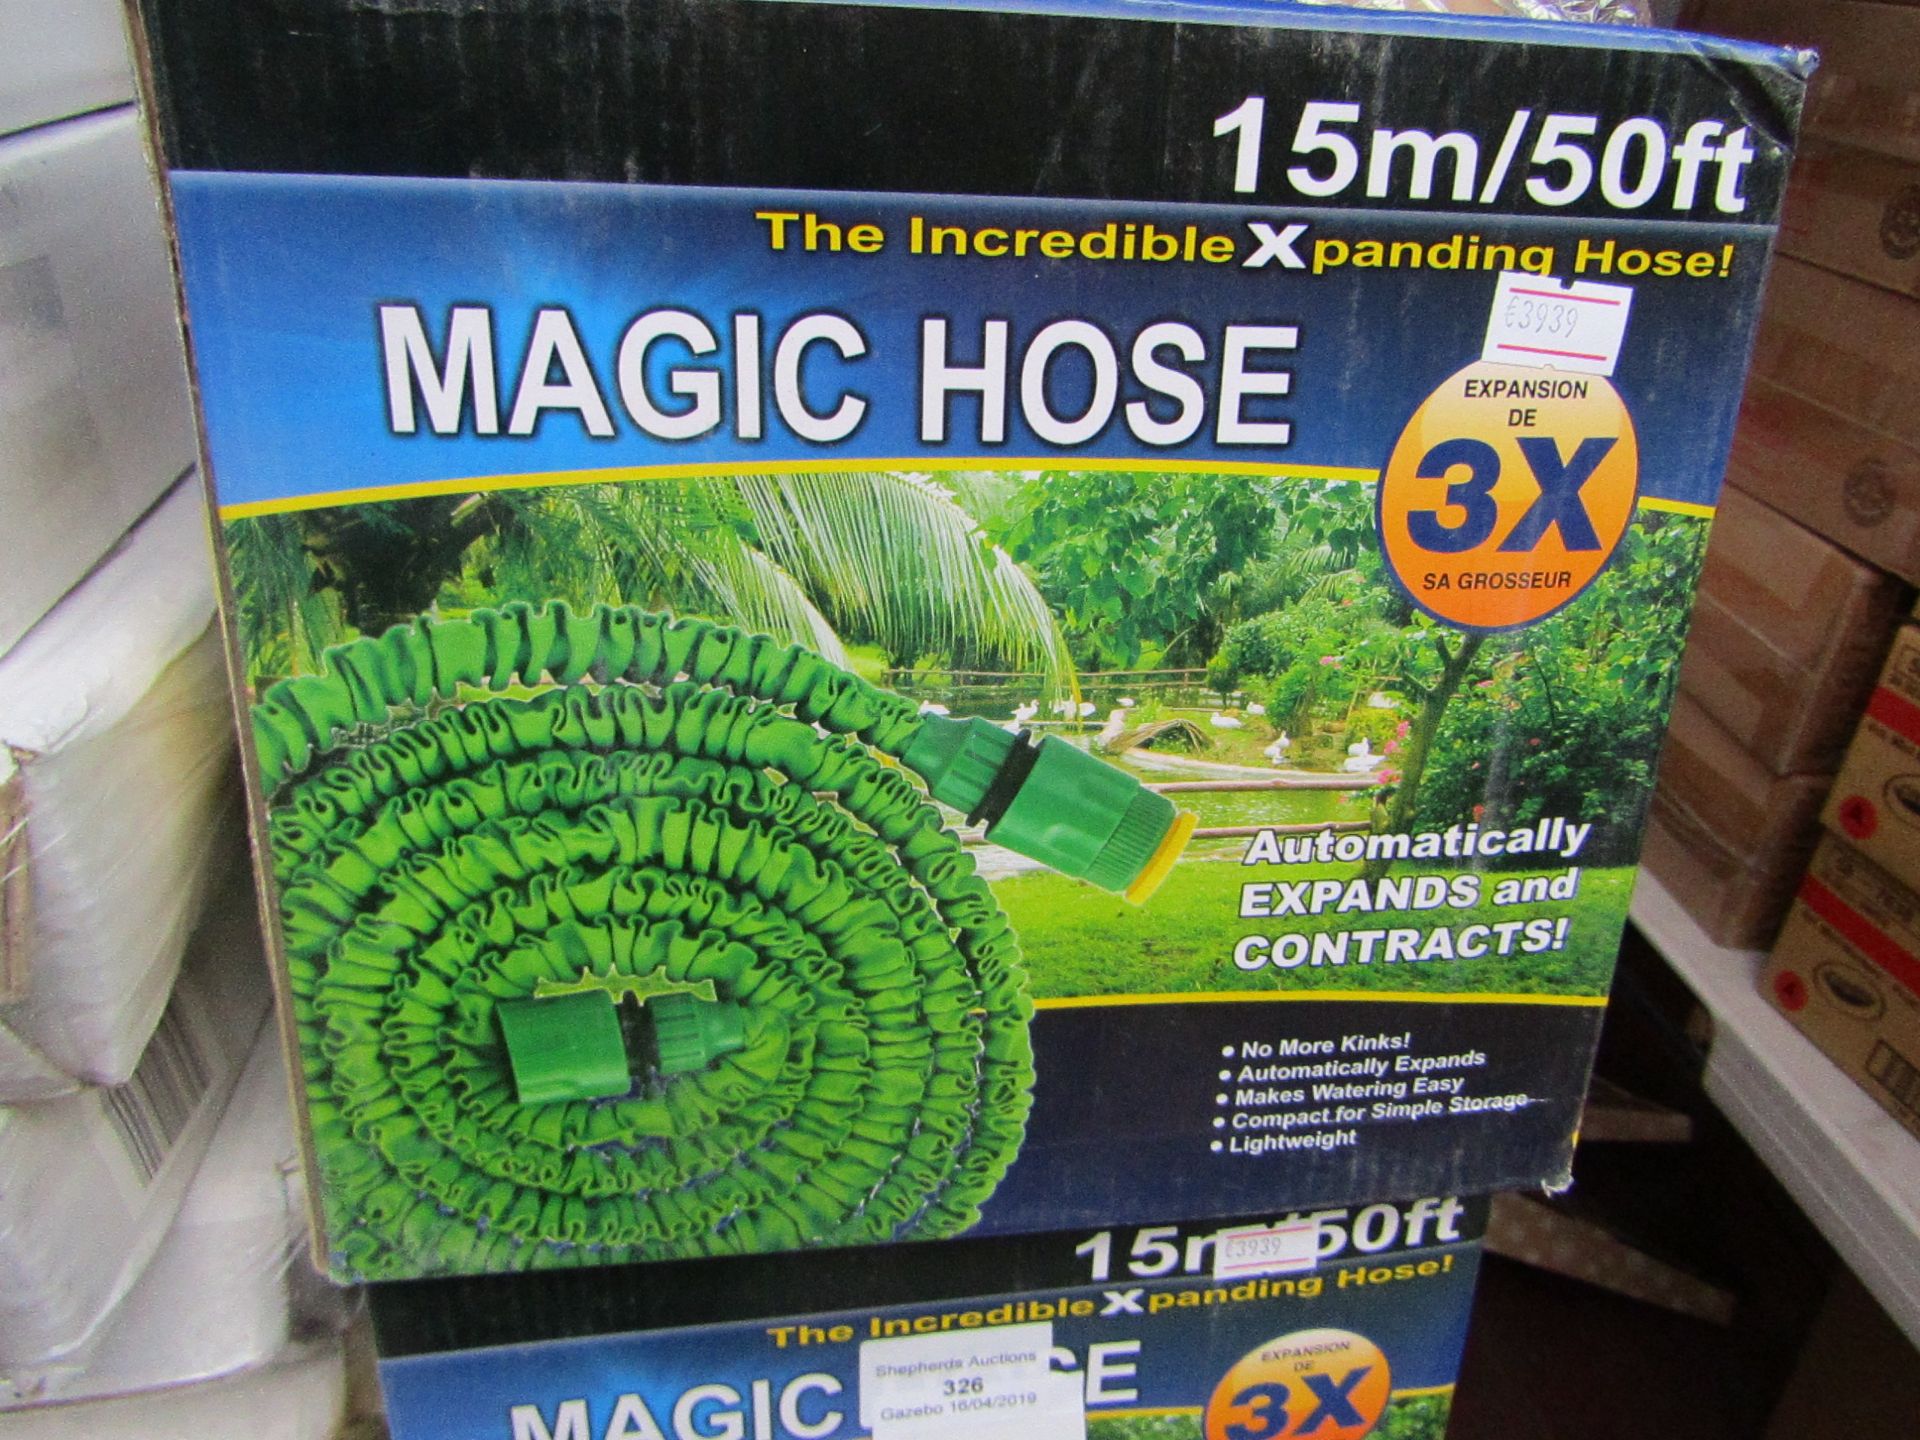 50ft Magic expanding hose pipe, new and boxed comes with multi function hose trigger gun.